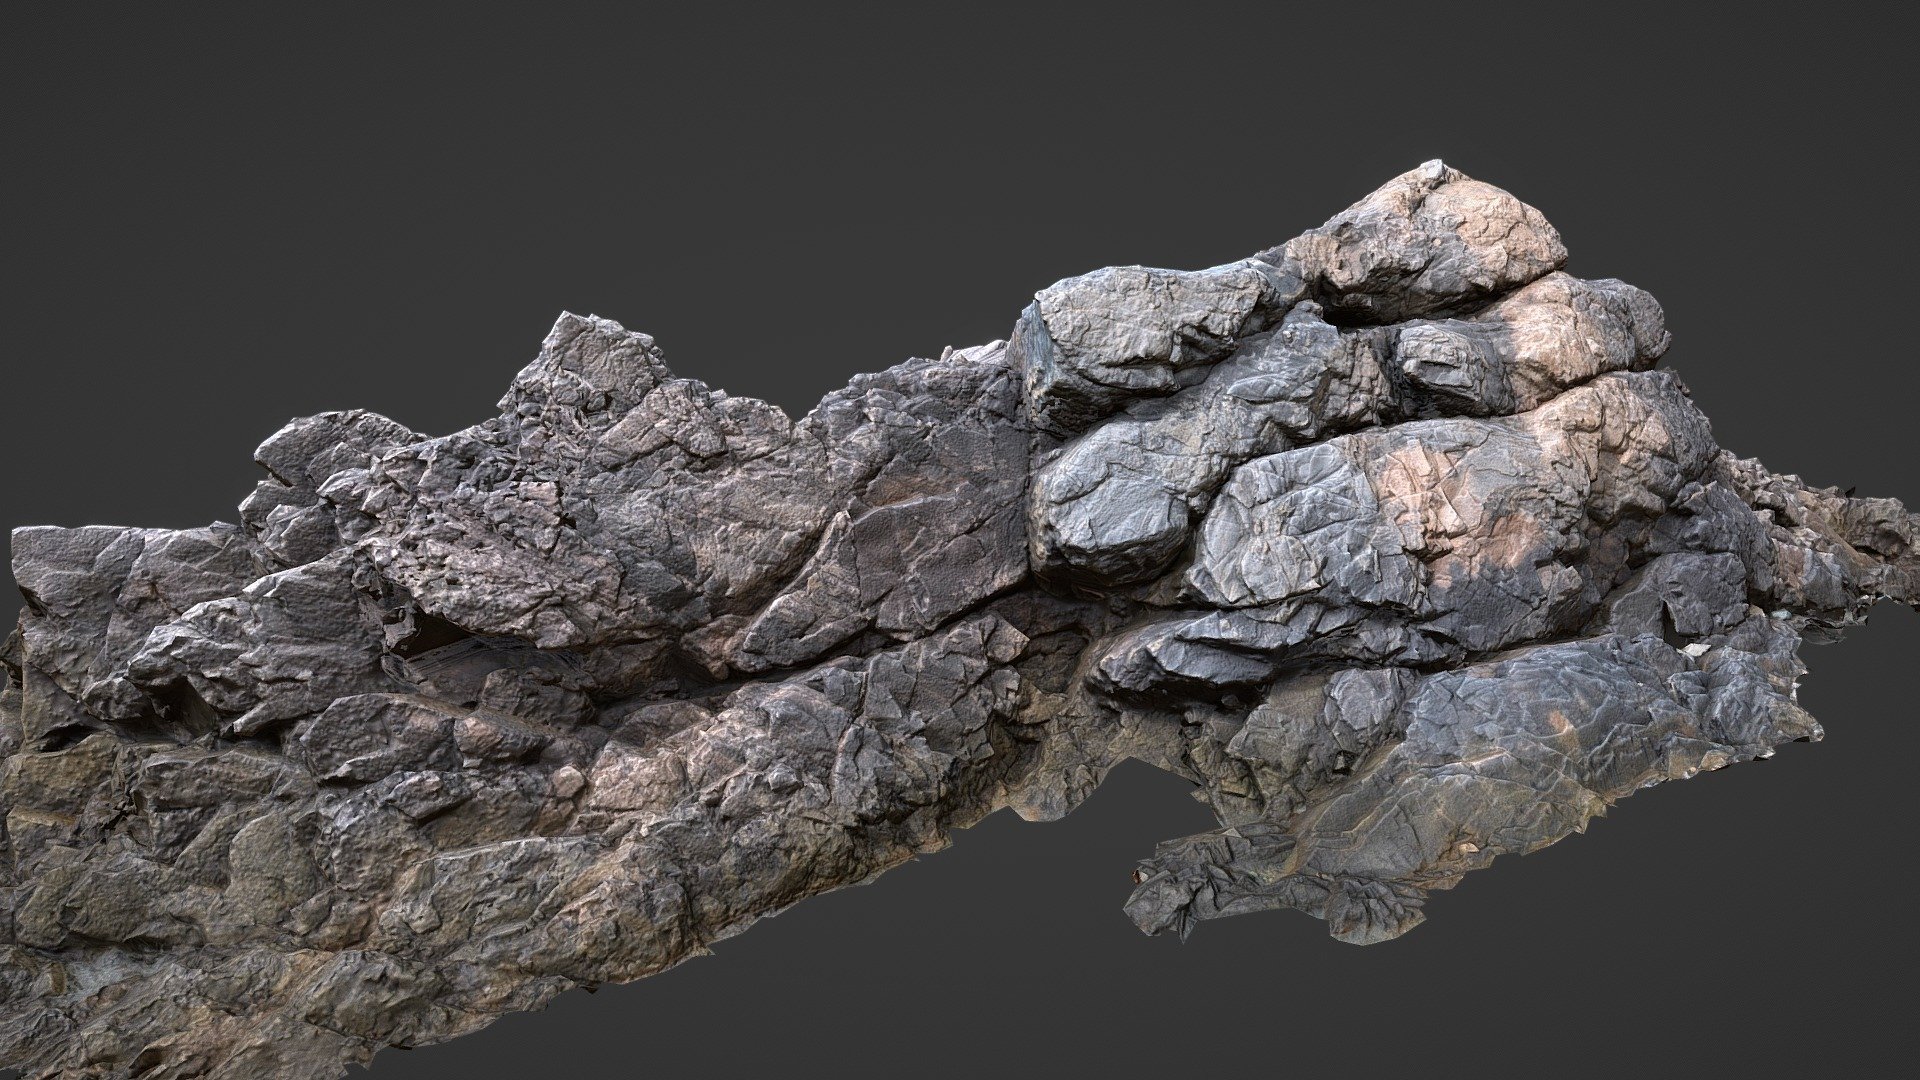 Practice shooting mountain rocks
This model may appear in the games I develop

The model was shot using a drone and was generated from 31 8064 × 6048 pixel photos 3d model